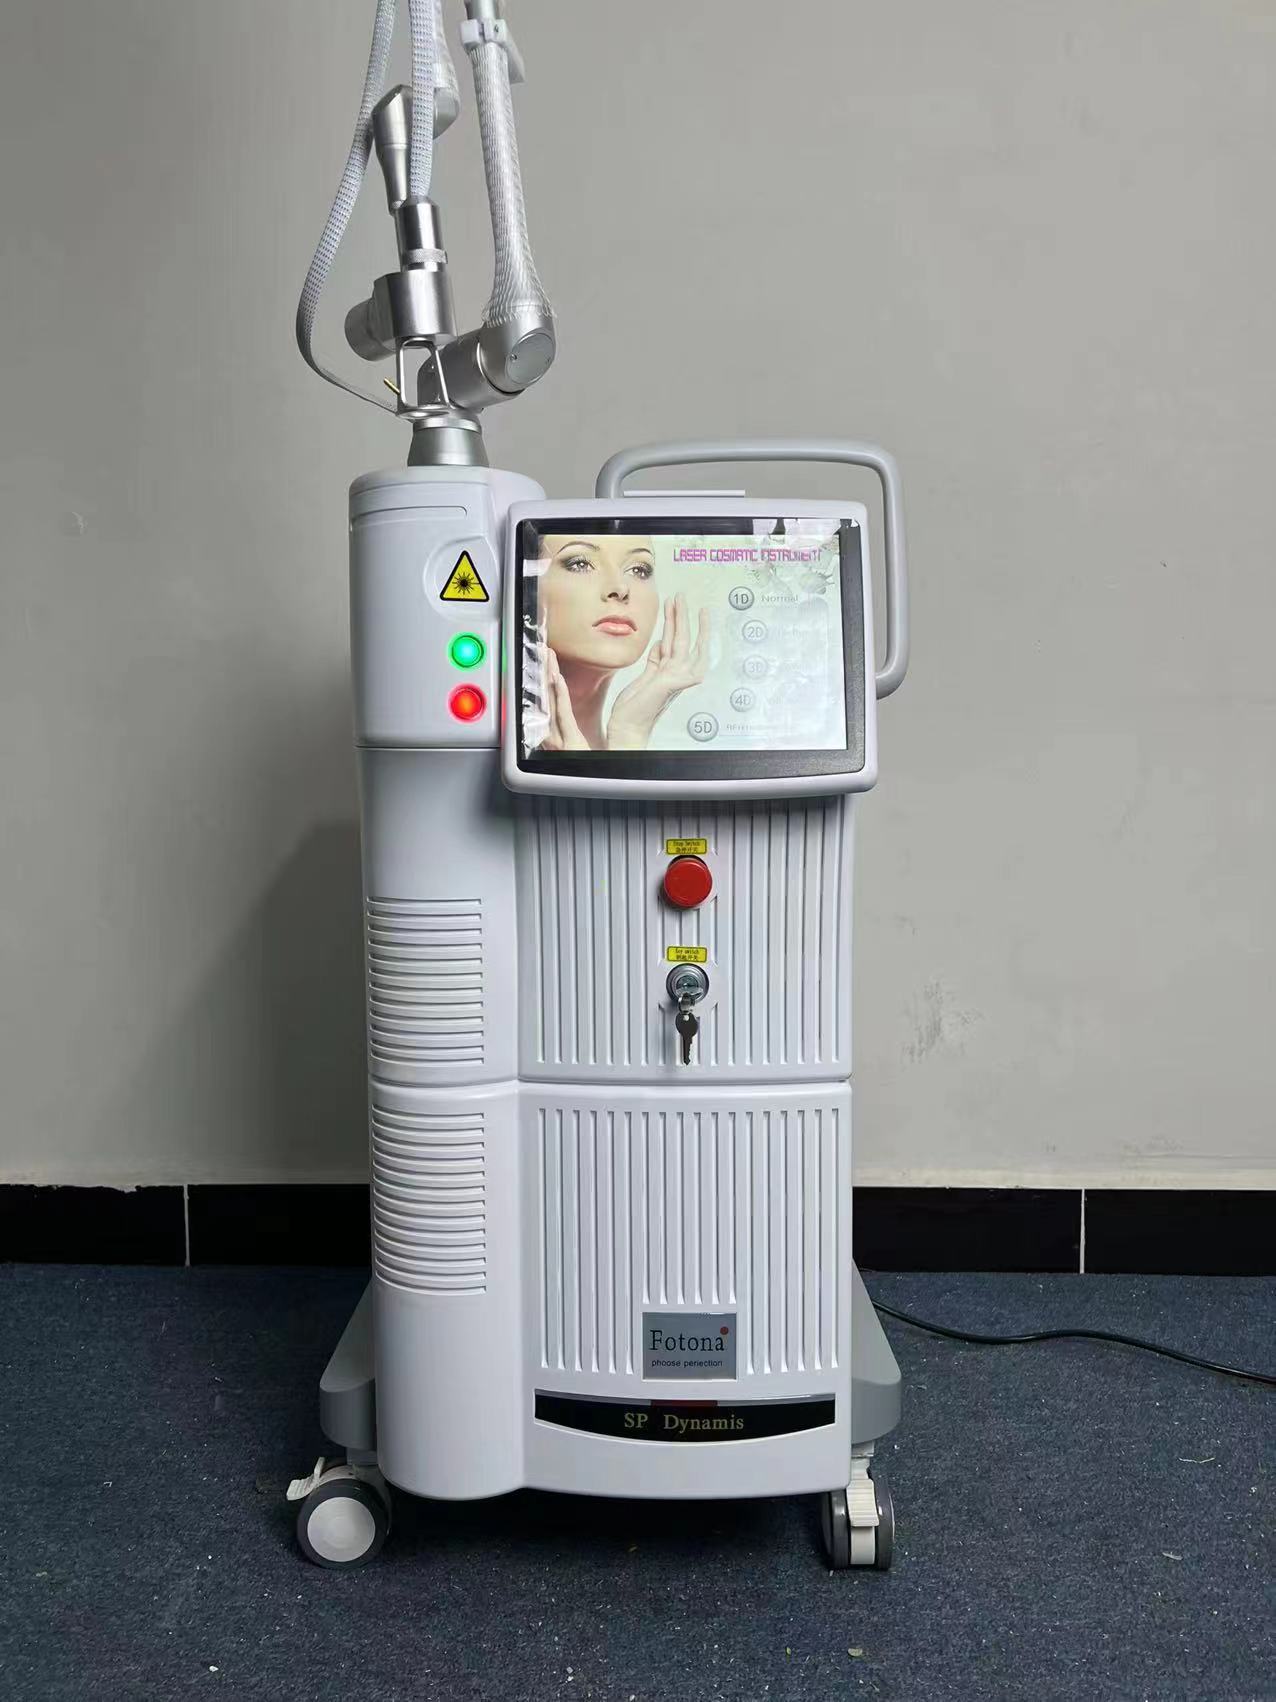 Beauty Items CO2 Fractionallaser Instruction painless comforable lasting effective Whitening Liiting co2 laser Screen 7 inches with glass tube